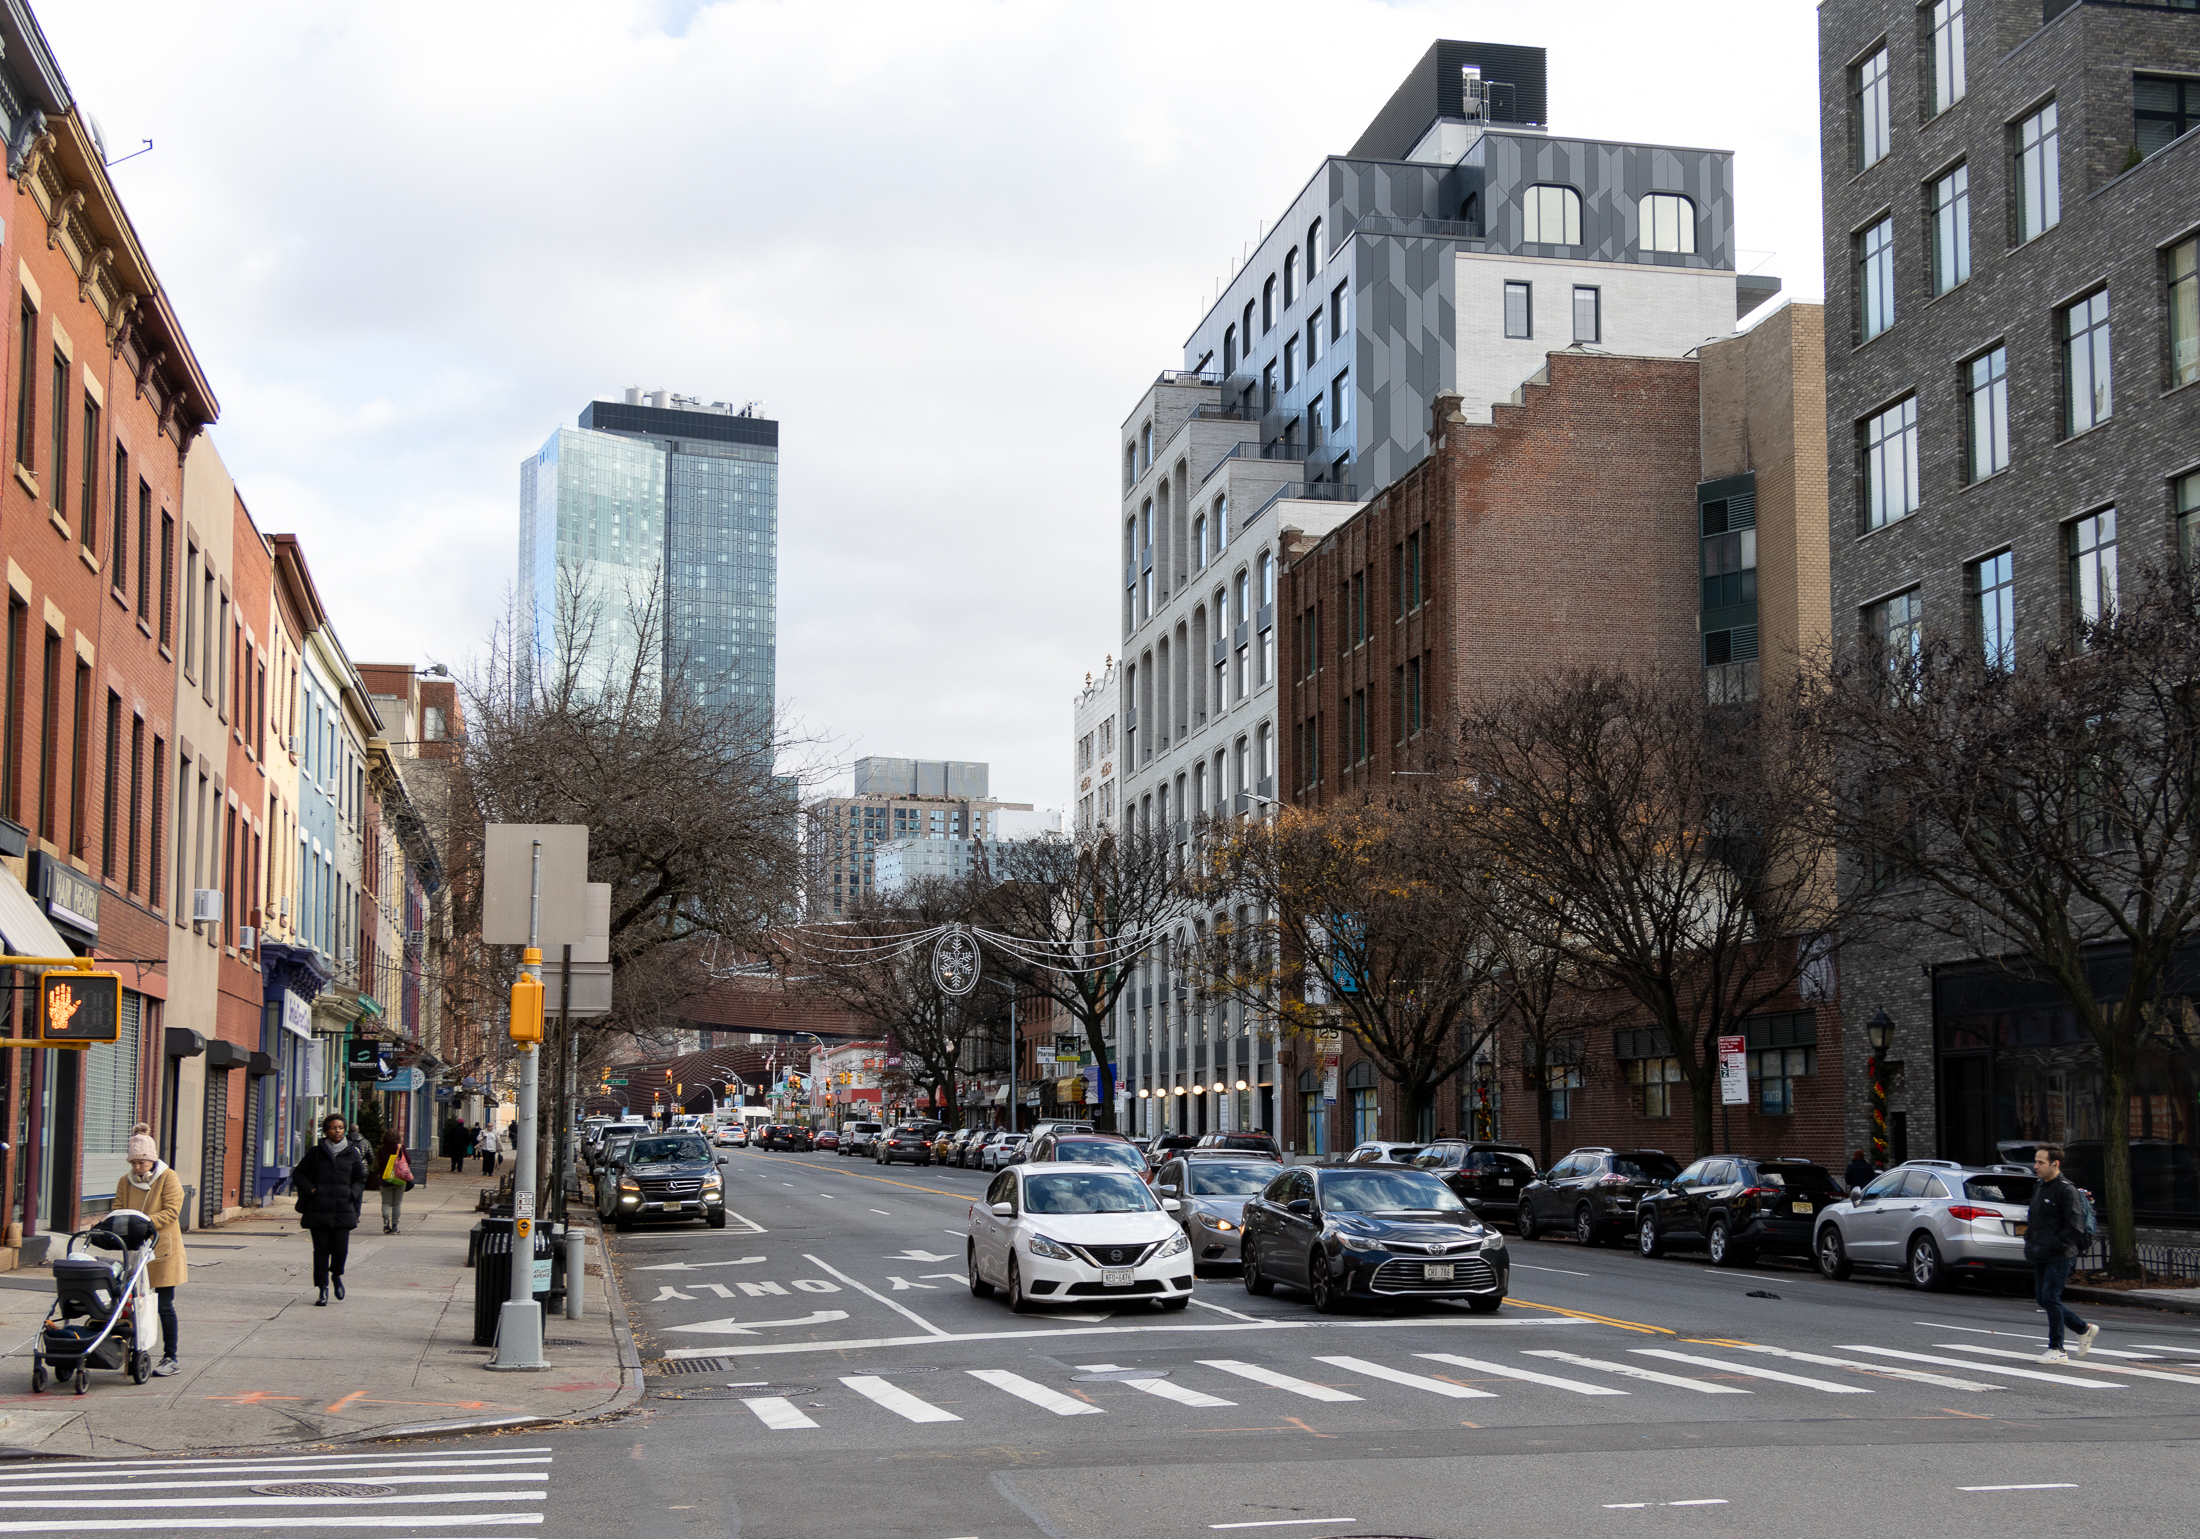 view on atlantic avenue showing new and old buidlings